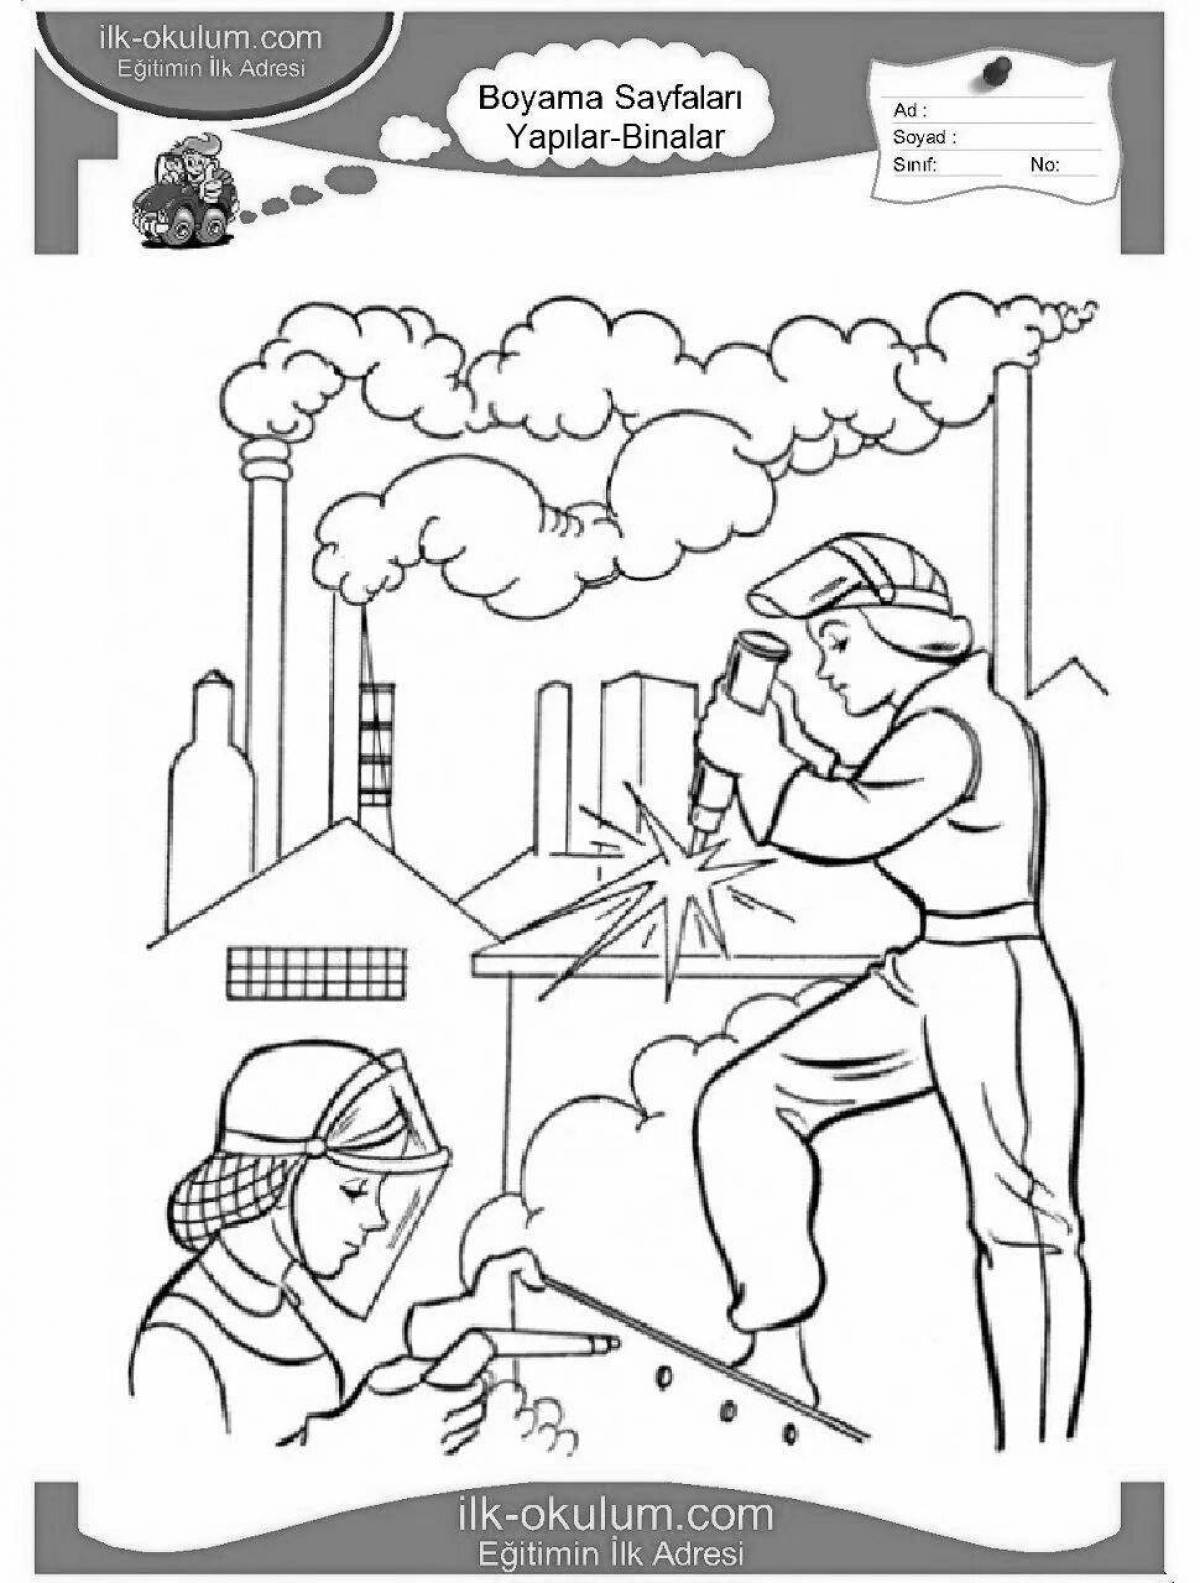 Occupational safety drawings through the eyes of children #3